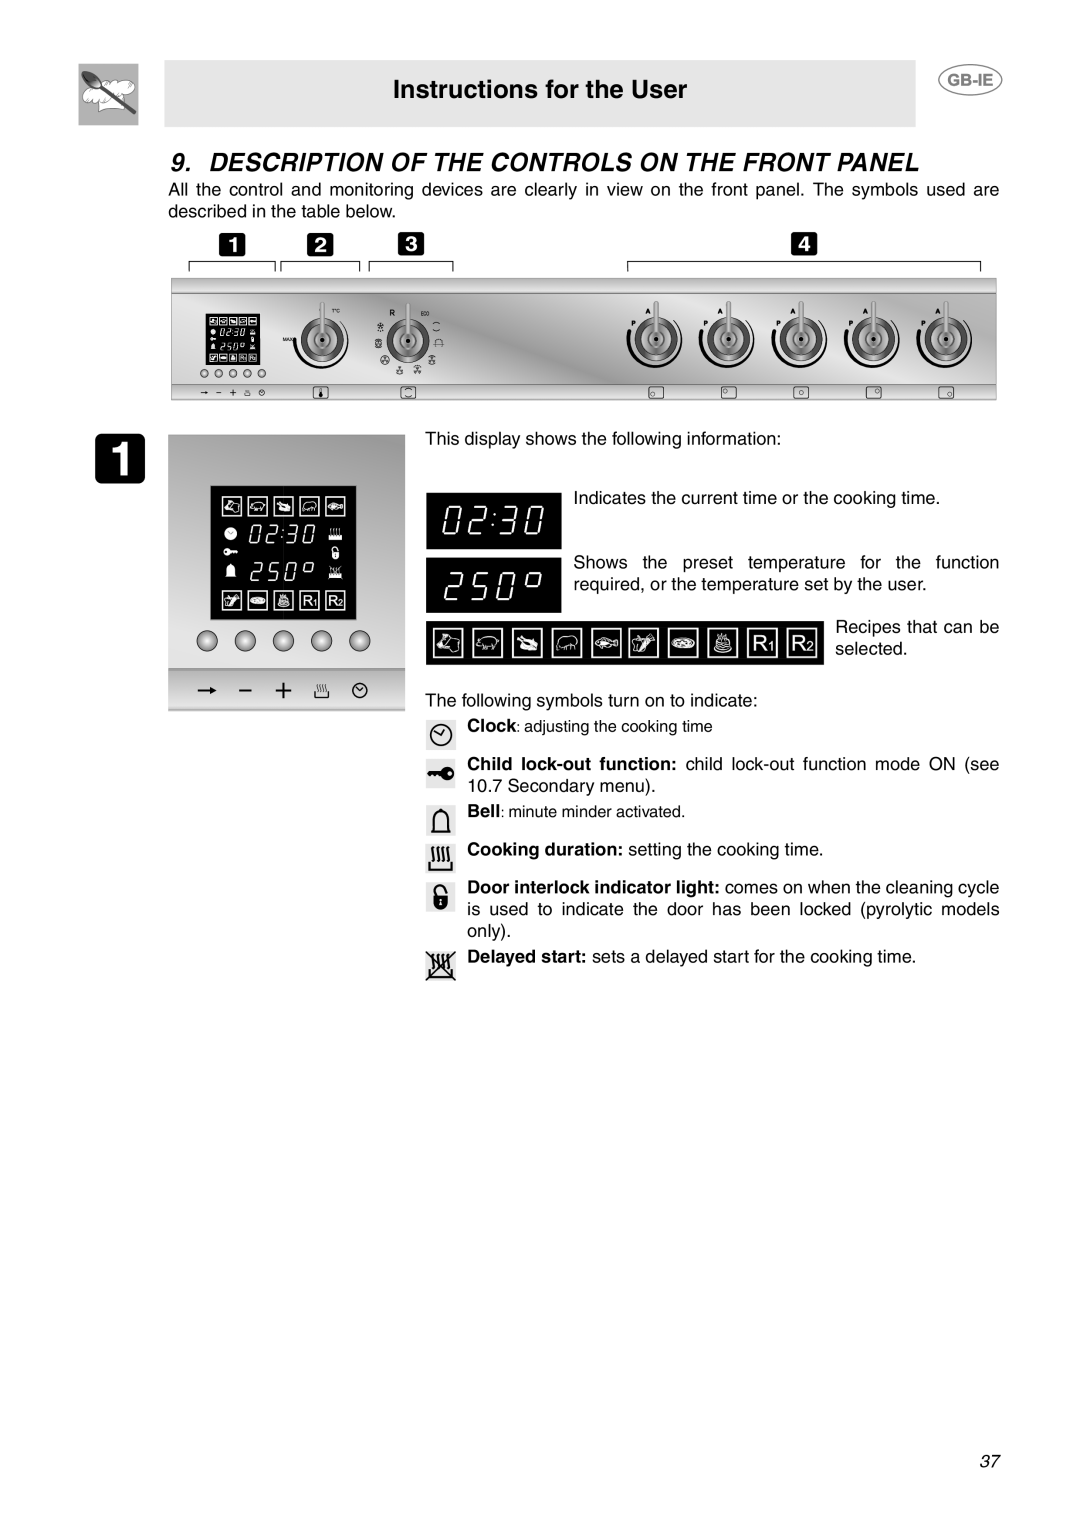 Smeg CE9IMX manual Description Of The Controls On The Front Panel, Instructions for the User 